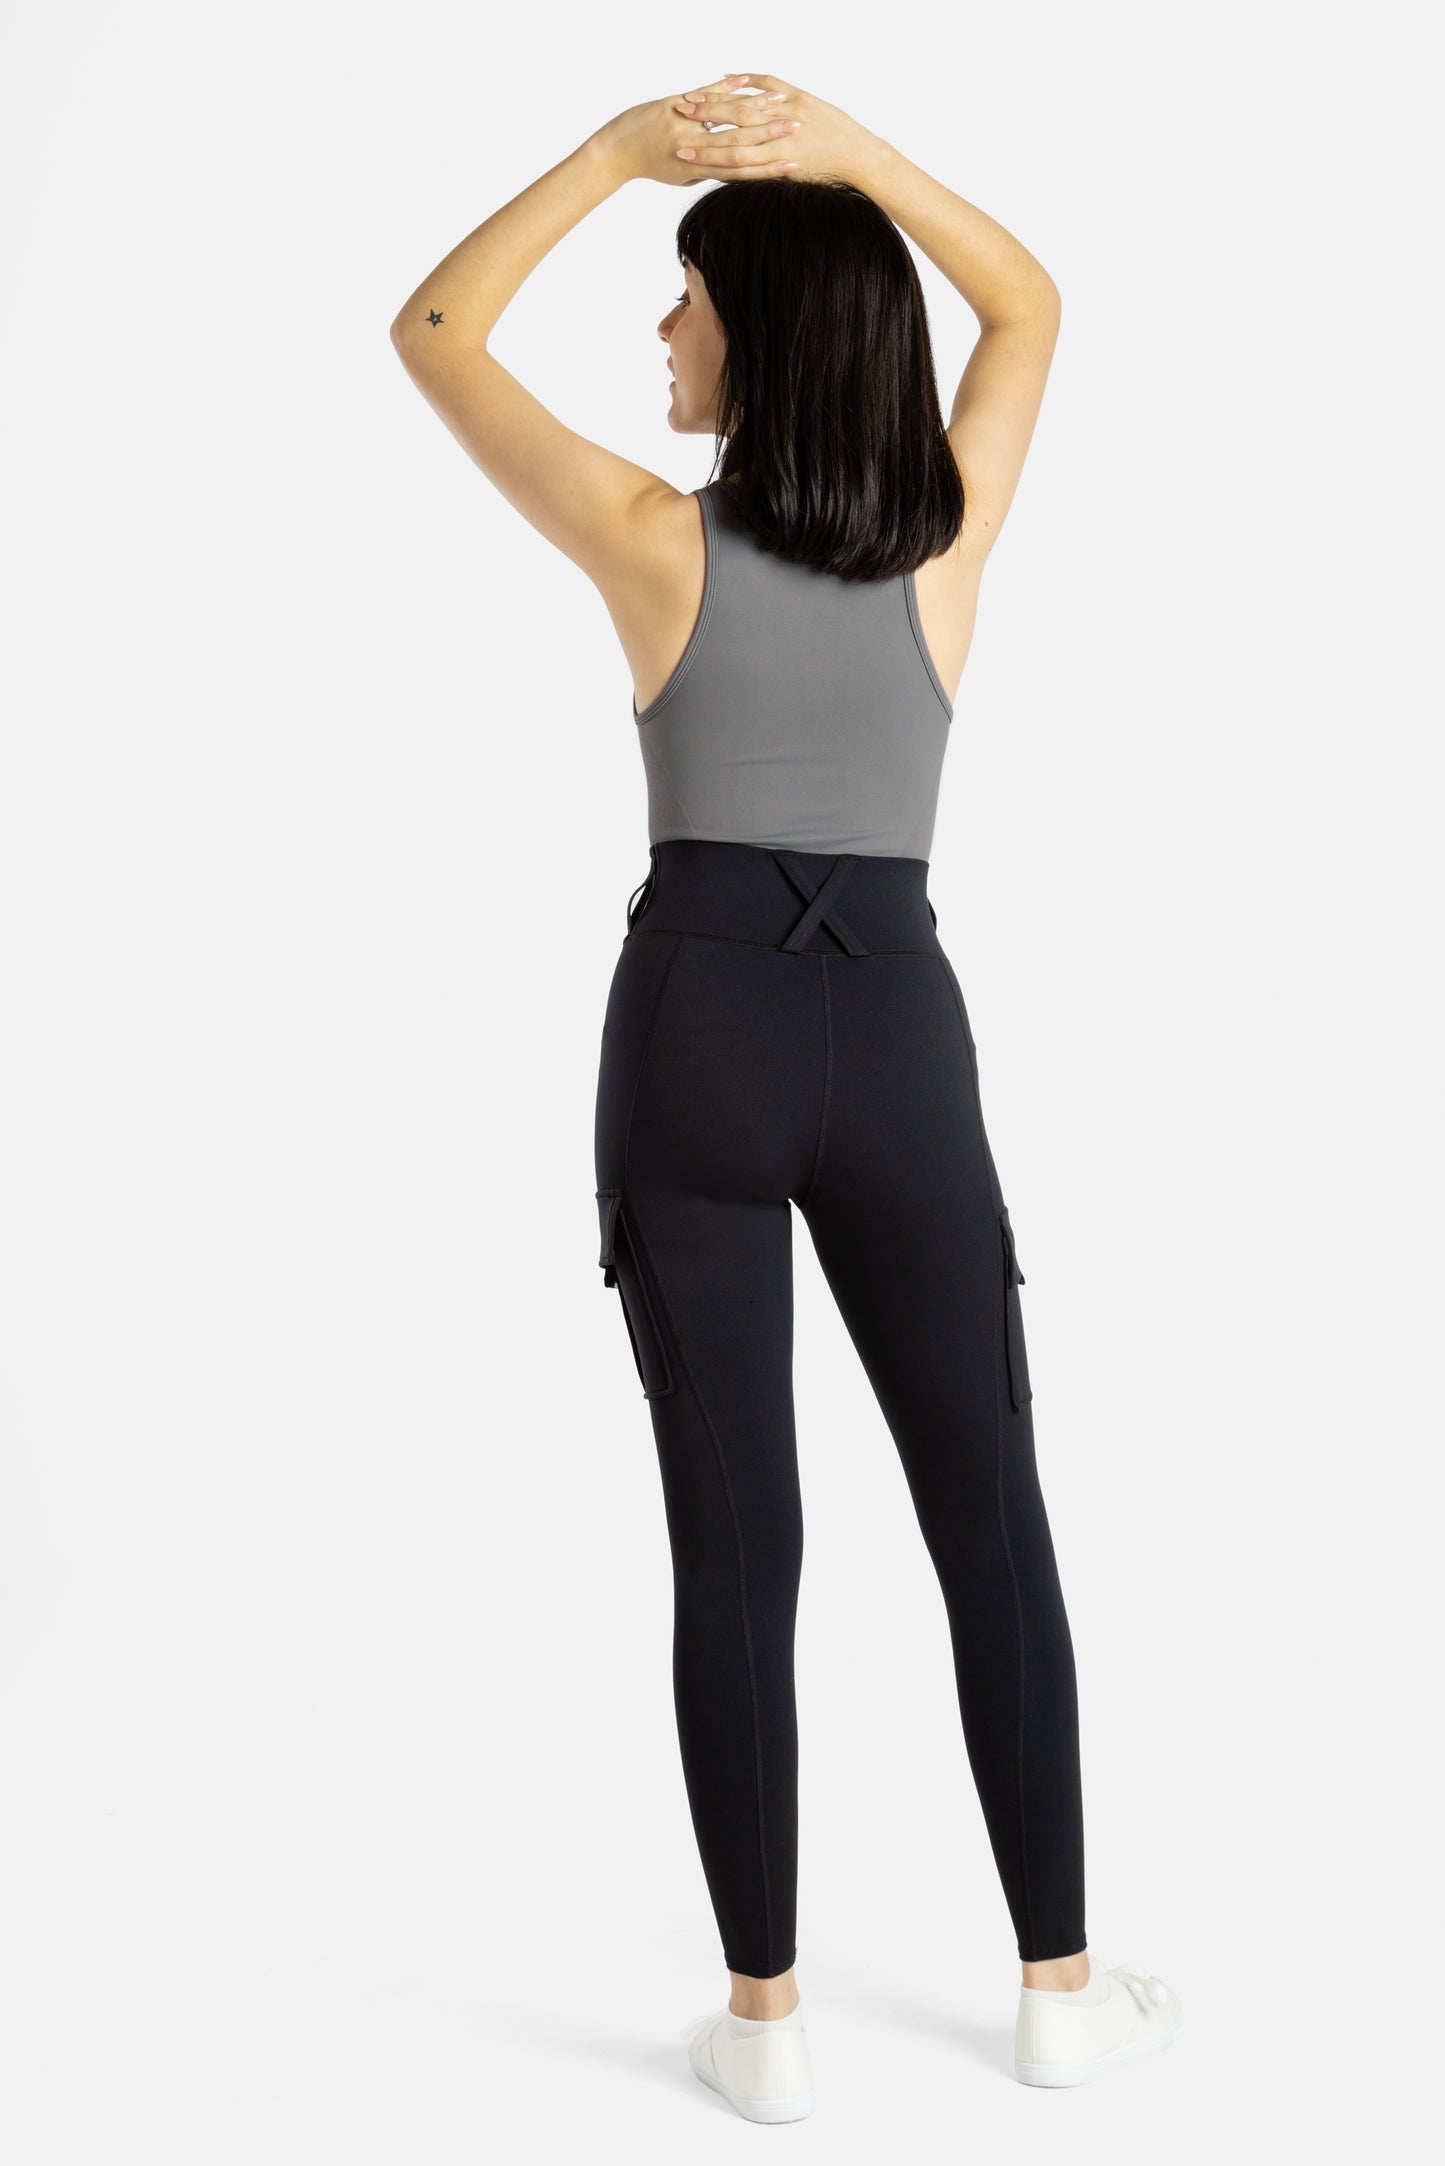 The back of an white woman (with long black hair and hoop earrings) who is wearing a charcoal tank top and black leggings. Her arms are on her head.